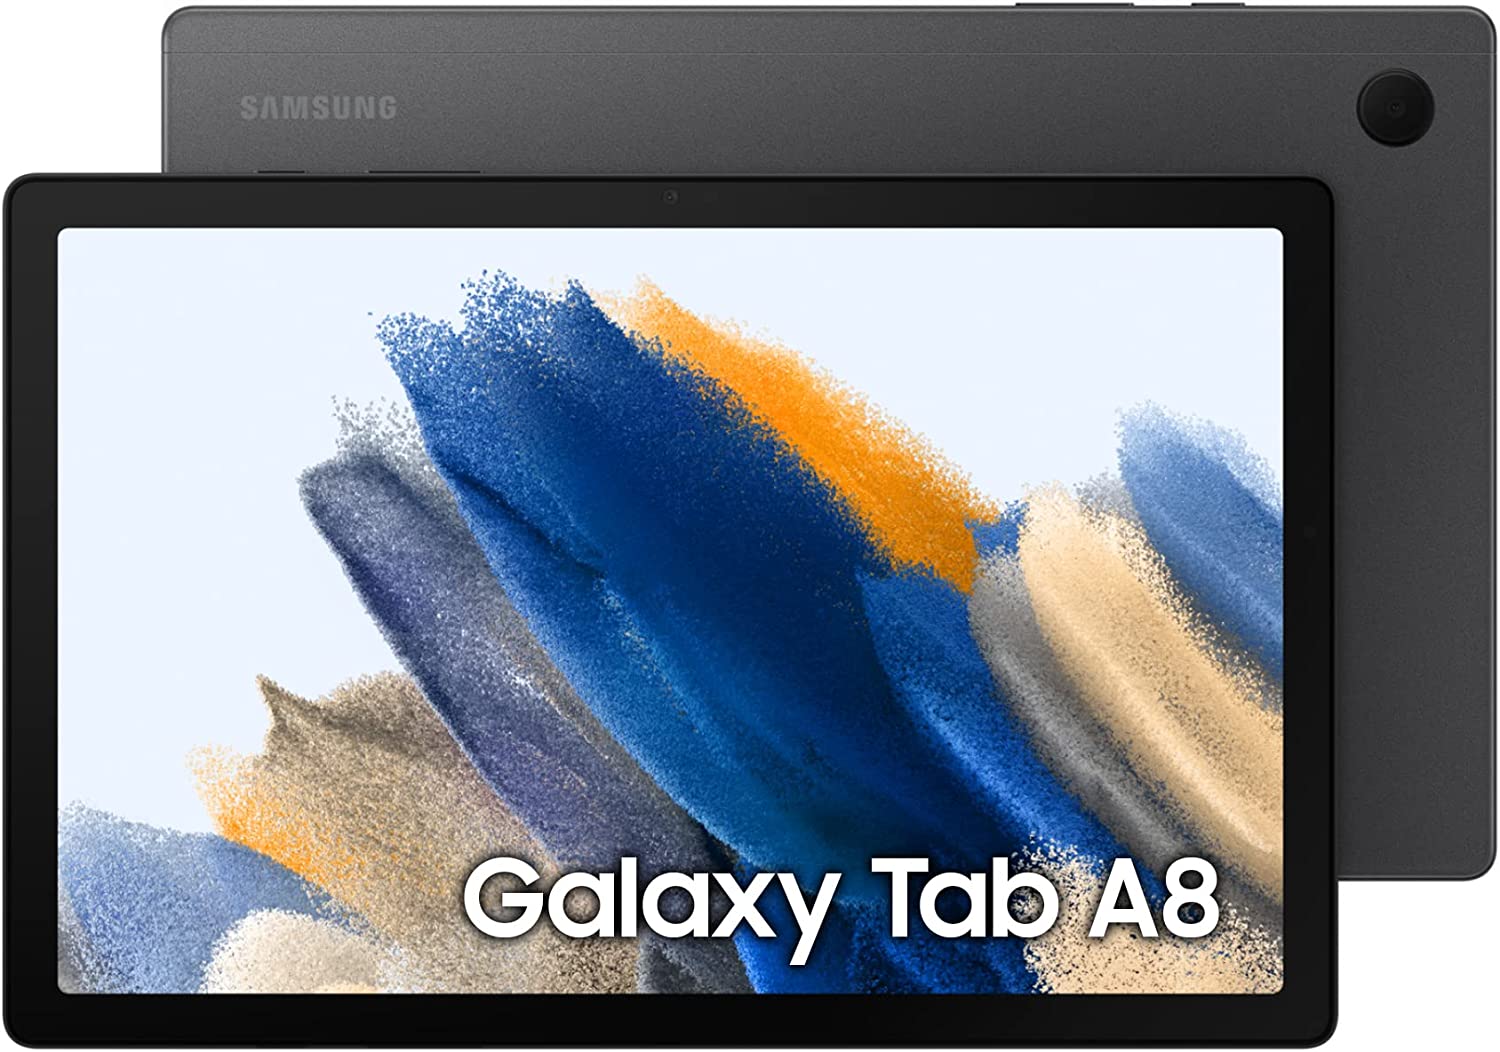 Samsung Galaxy Tab A8, Android Tablet